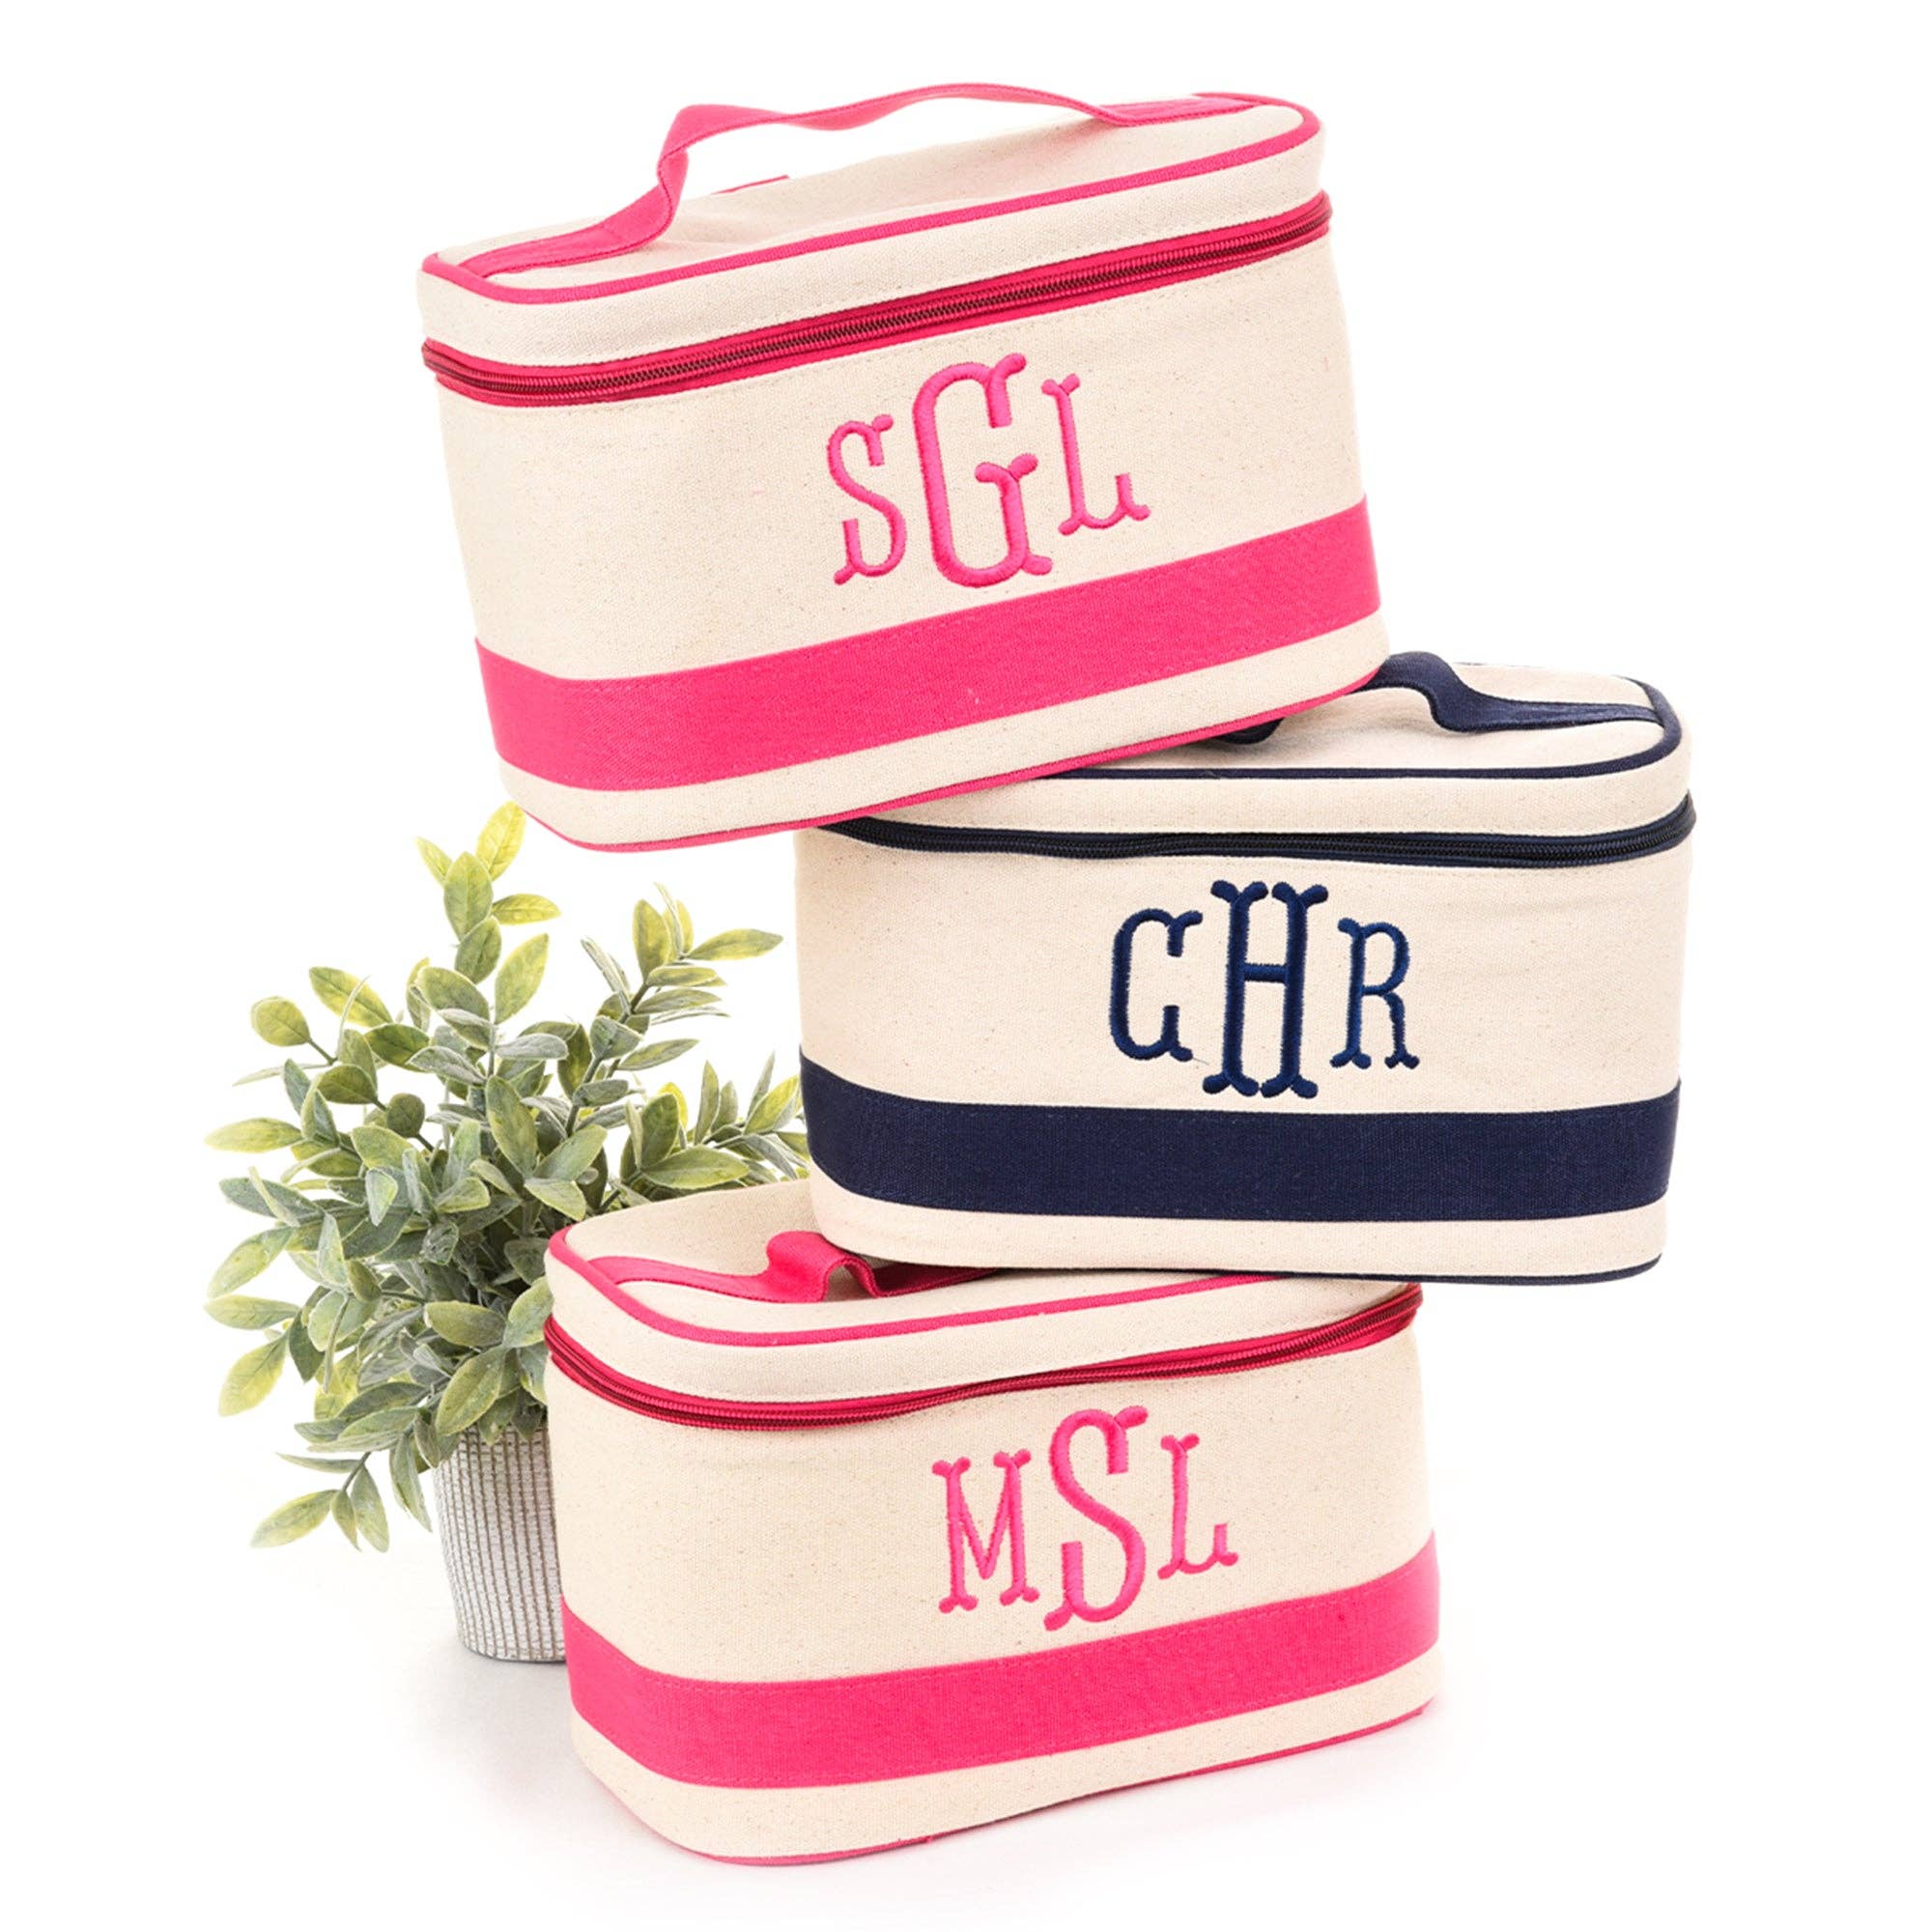 Linen train case with color block bands for accent and a monogram. Navy, Pink and Red